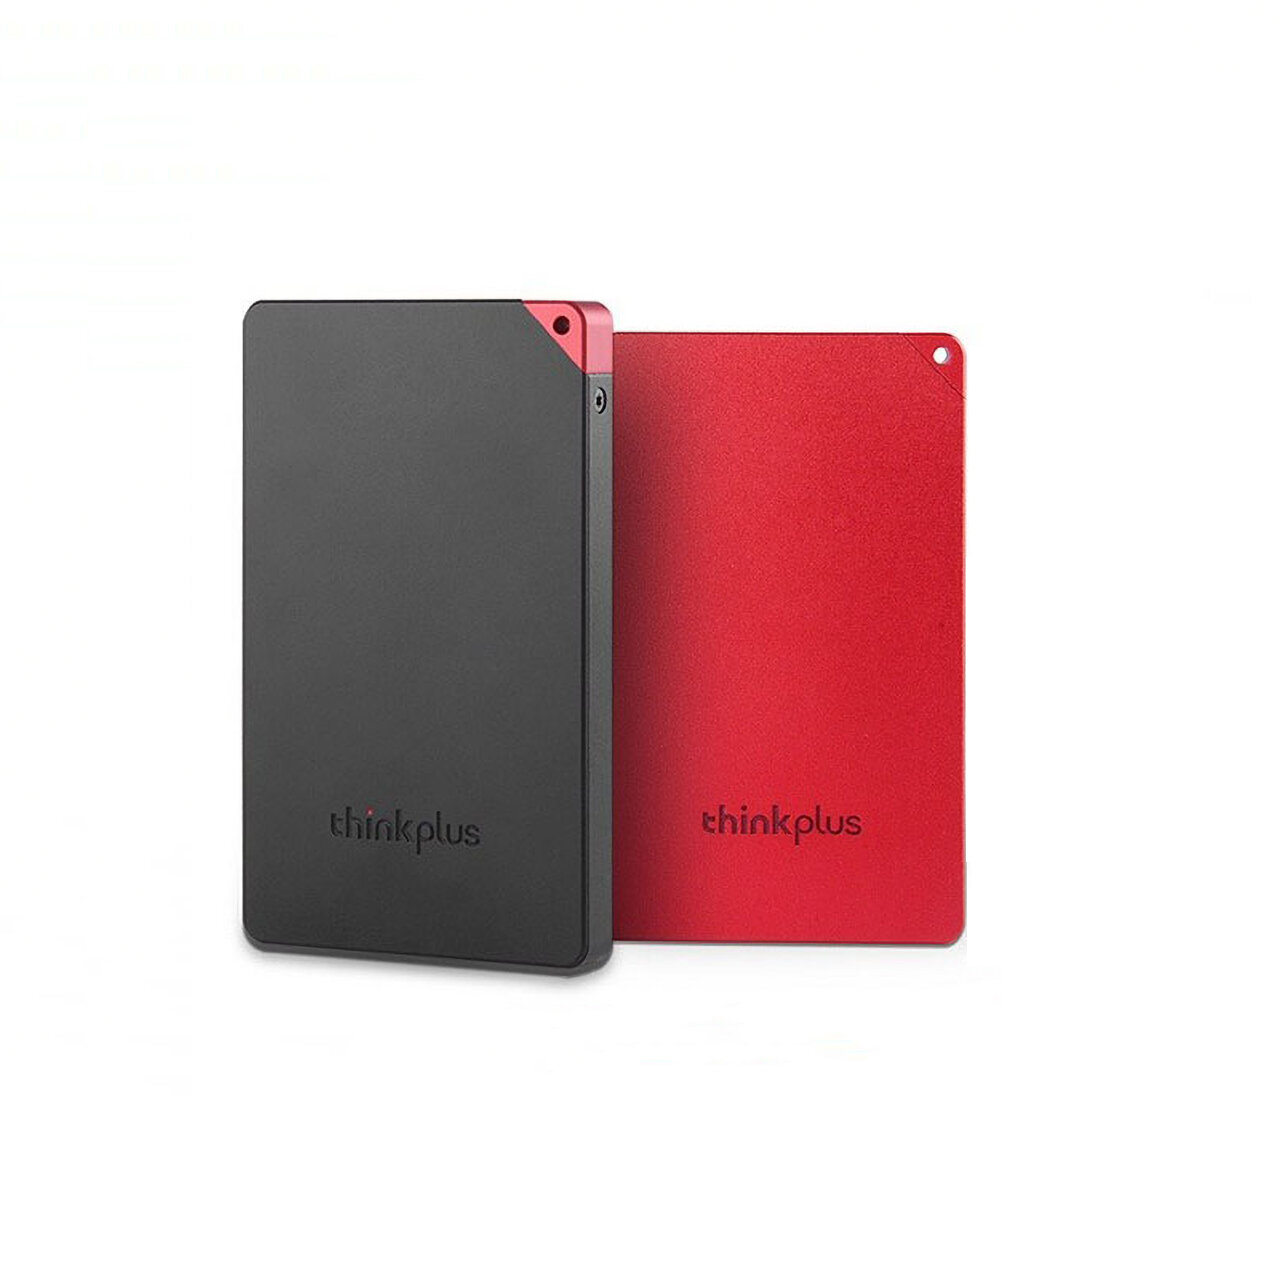 Image of Lenovo Thinkplus PSSD Type-C & USB31 Gen2 Portable Solid State Drives External SSD 1TB 512G 256G Hard Drive for PC Lapt